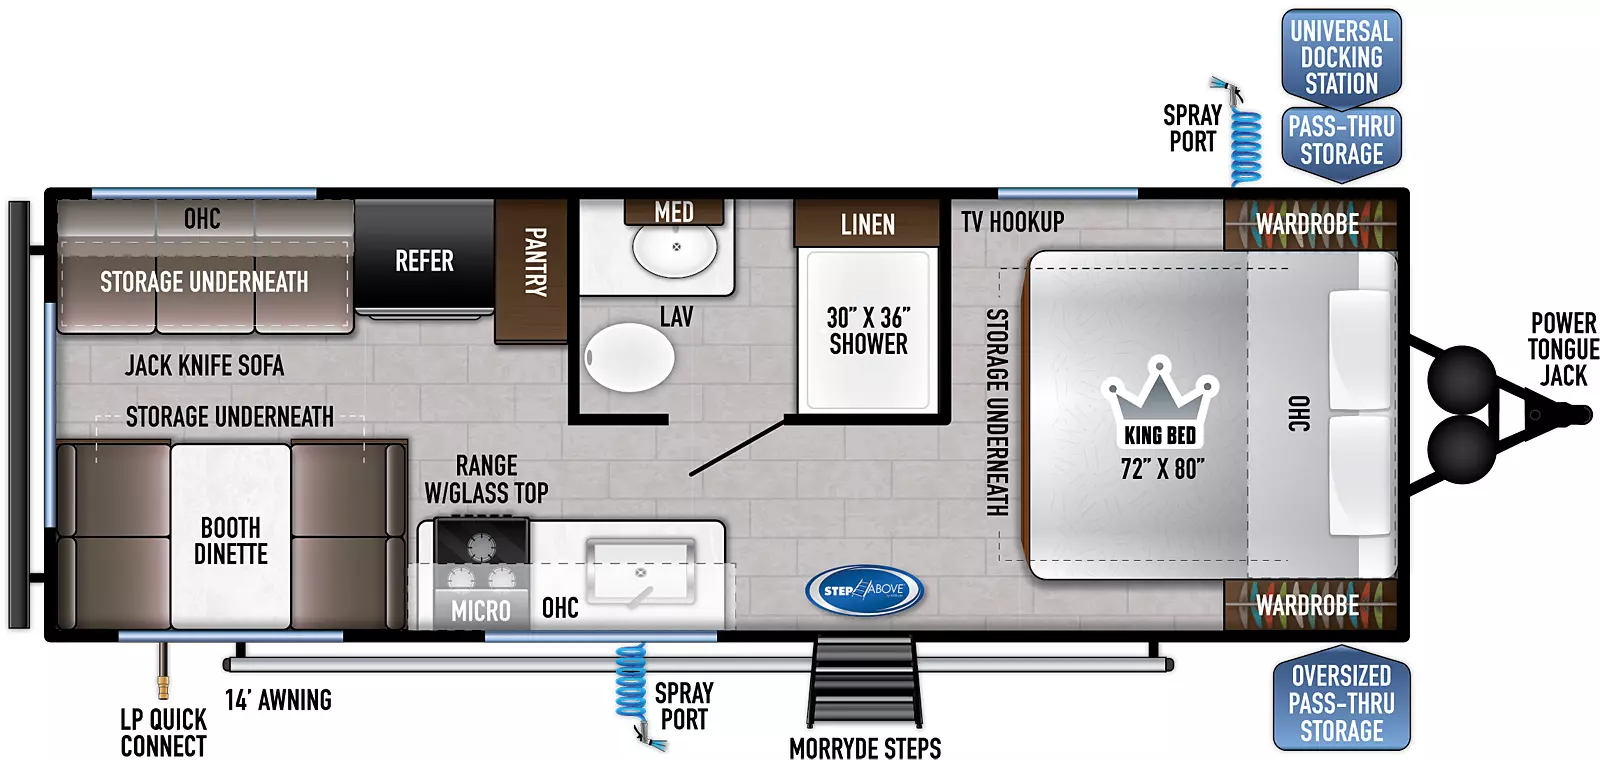 The 200RD has zero slides and one entry door on the door side. Interior layout from front to back: front bedroom with king bed featuring overhead cabinets bedside wardrobes, TV hookup, and underbed storage; Side aisle bathroom on the off-door side with linen cabinet, shower, toilet, counter with sink, and overhead medicine cabinet; kitchen living dining area with pantry, refrigerator and jackknife sofa with storage and overhead cabinets on the off-door side, and booth dinette with storage underneath, range with glass top, microwave, sink, countertop and overhead cabinets on the door side; Exterior from front to back: Power tongue jack, oversized pass-thru storage on door side, universal docking station in pass-thru on off-door side with spray port; solid steps at entry door on door side, LP quick connect in door side rear, spray port and 14' awning. 